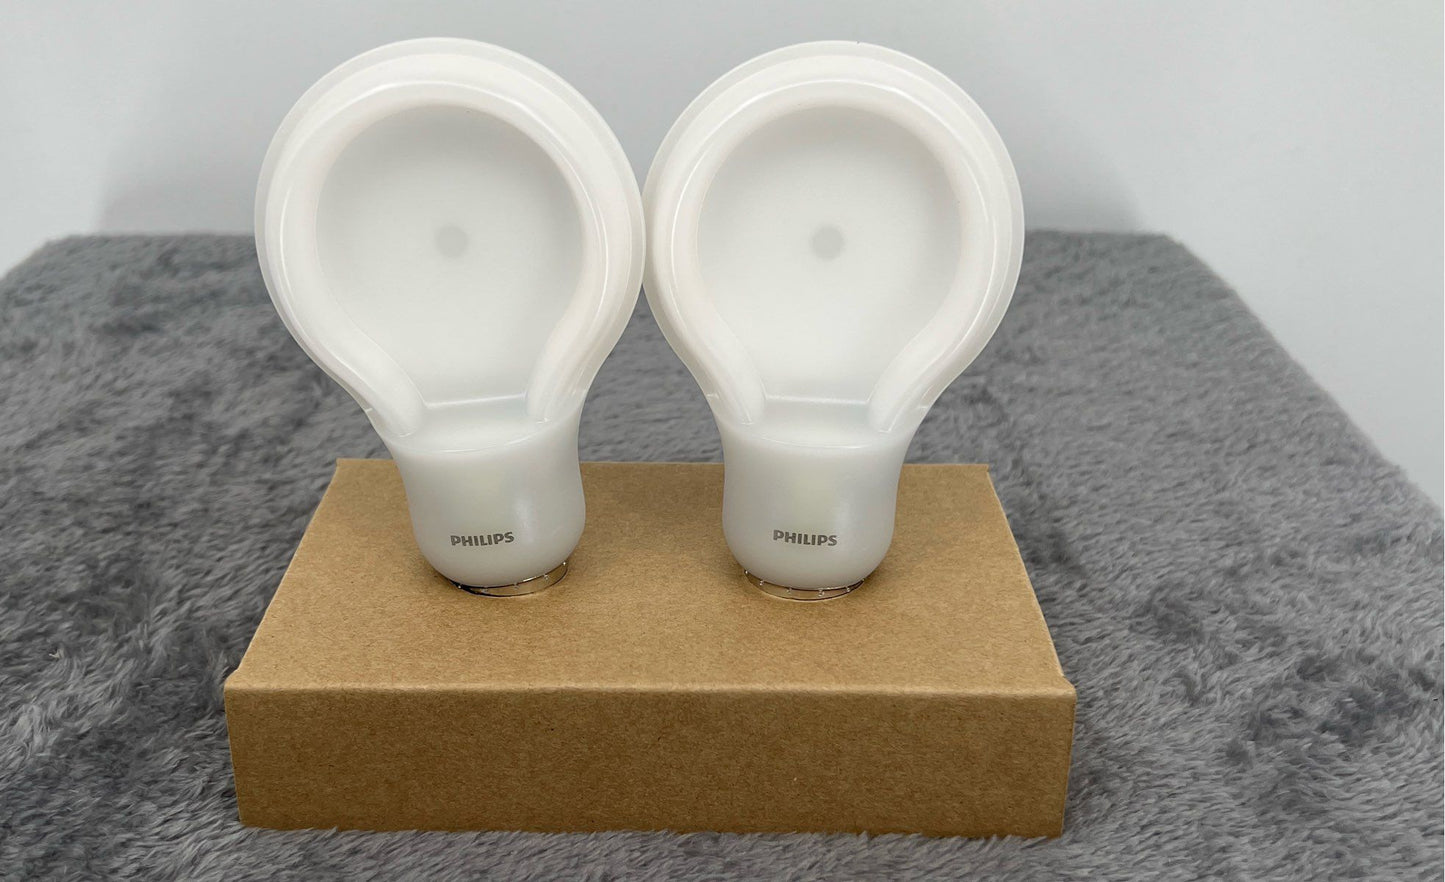 Philips LED SlimStyle Dimmable Soft White Light A21 2-Pack-13W 2700K 120V